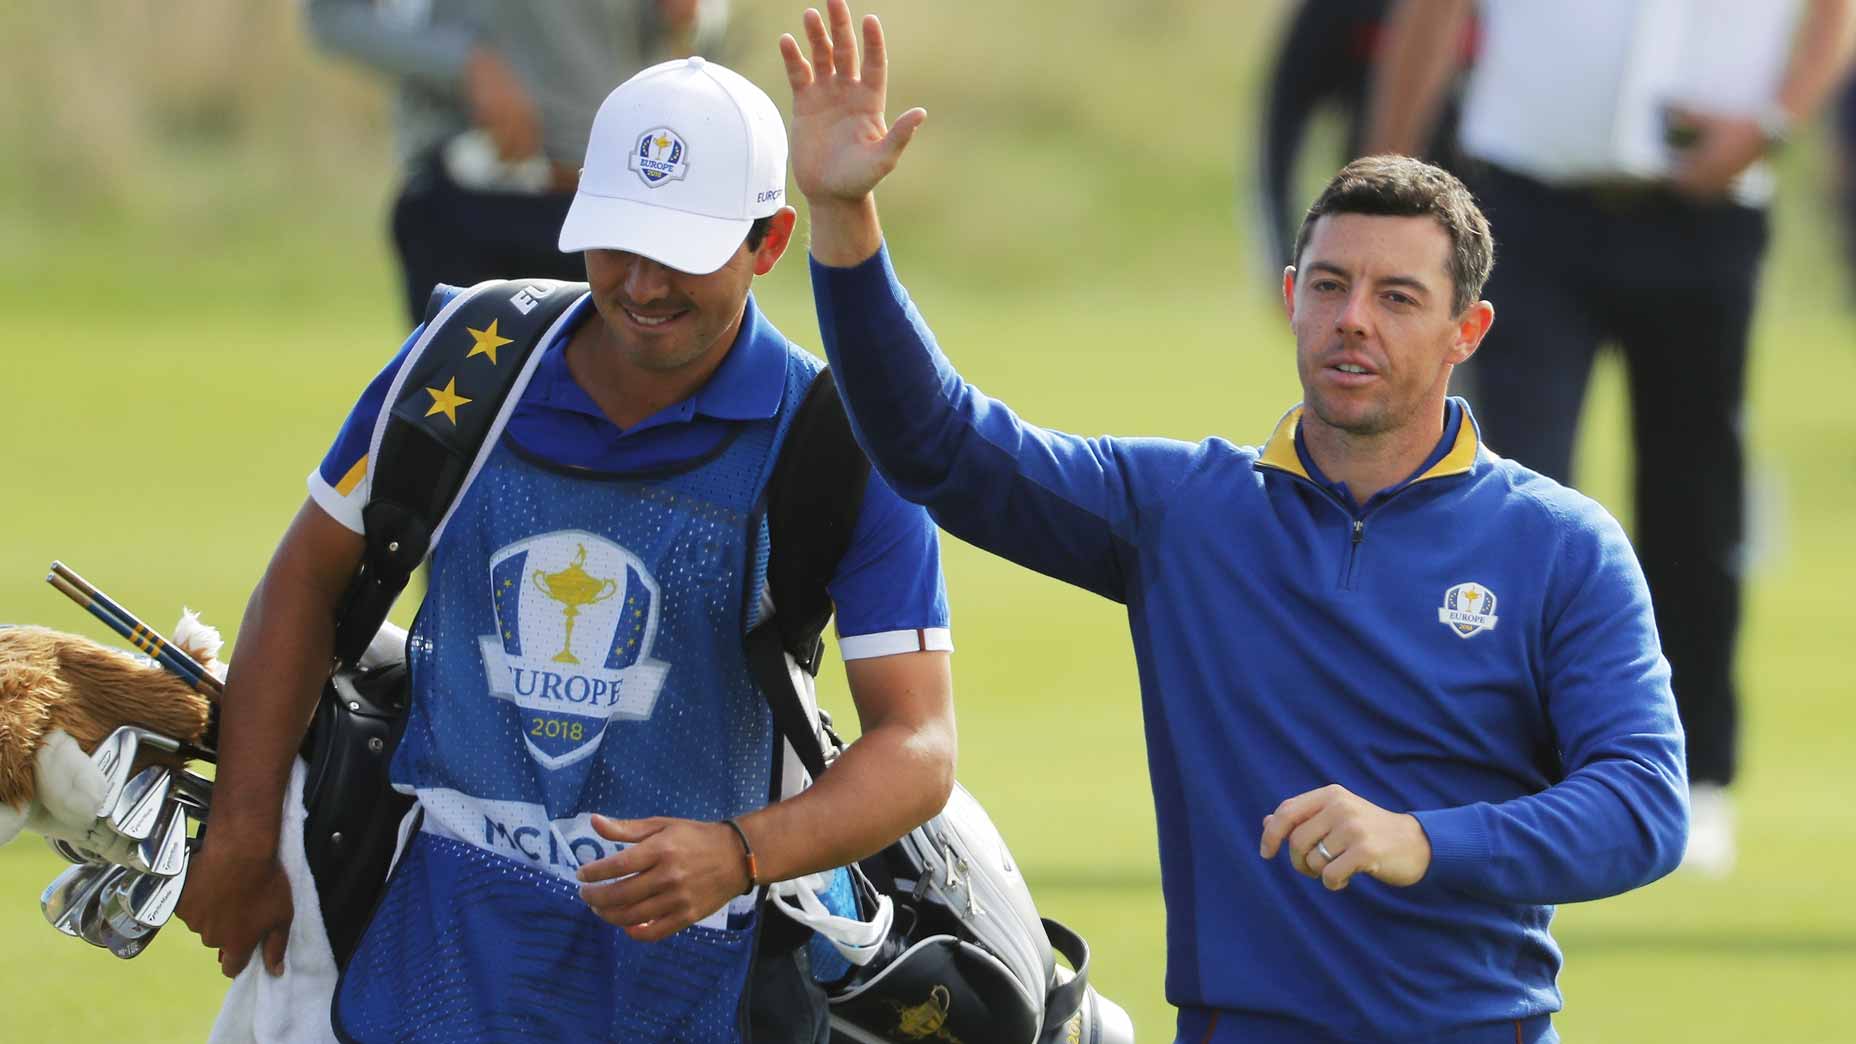 Rory McIlroy Will Skip European Tour's Flagship Event